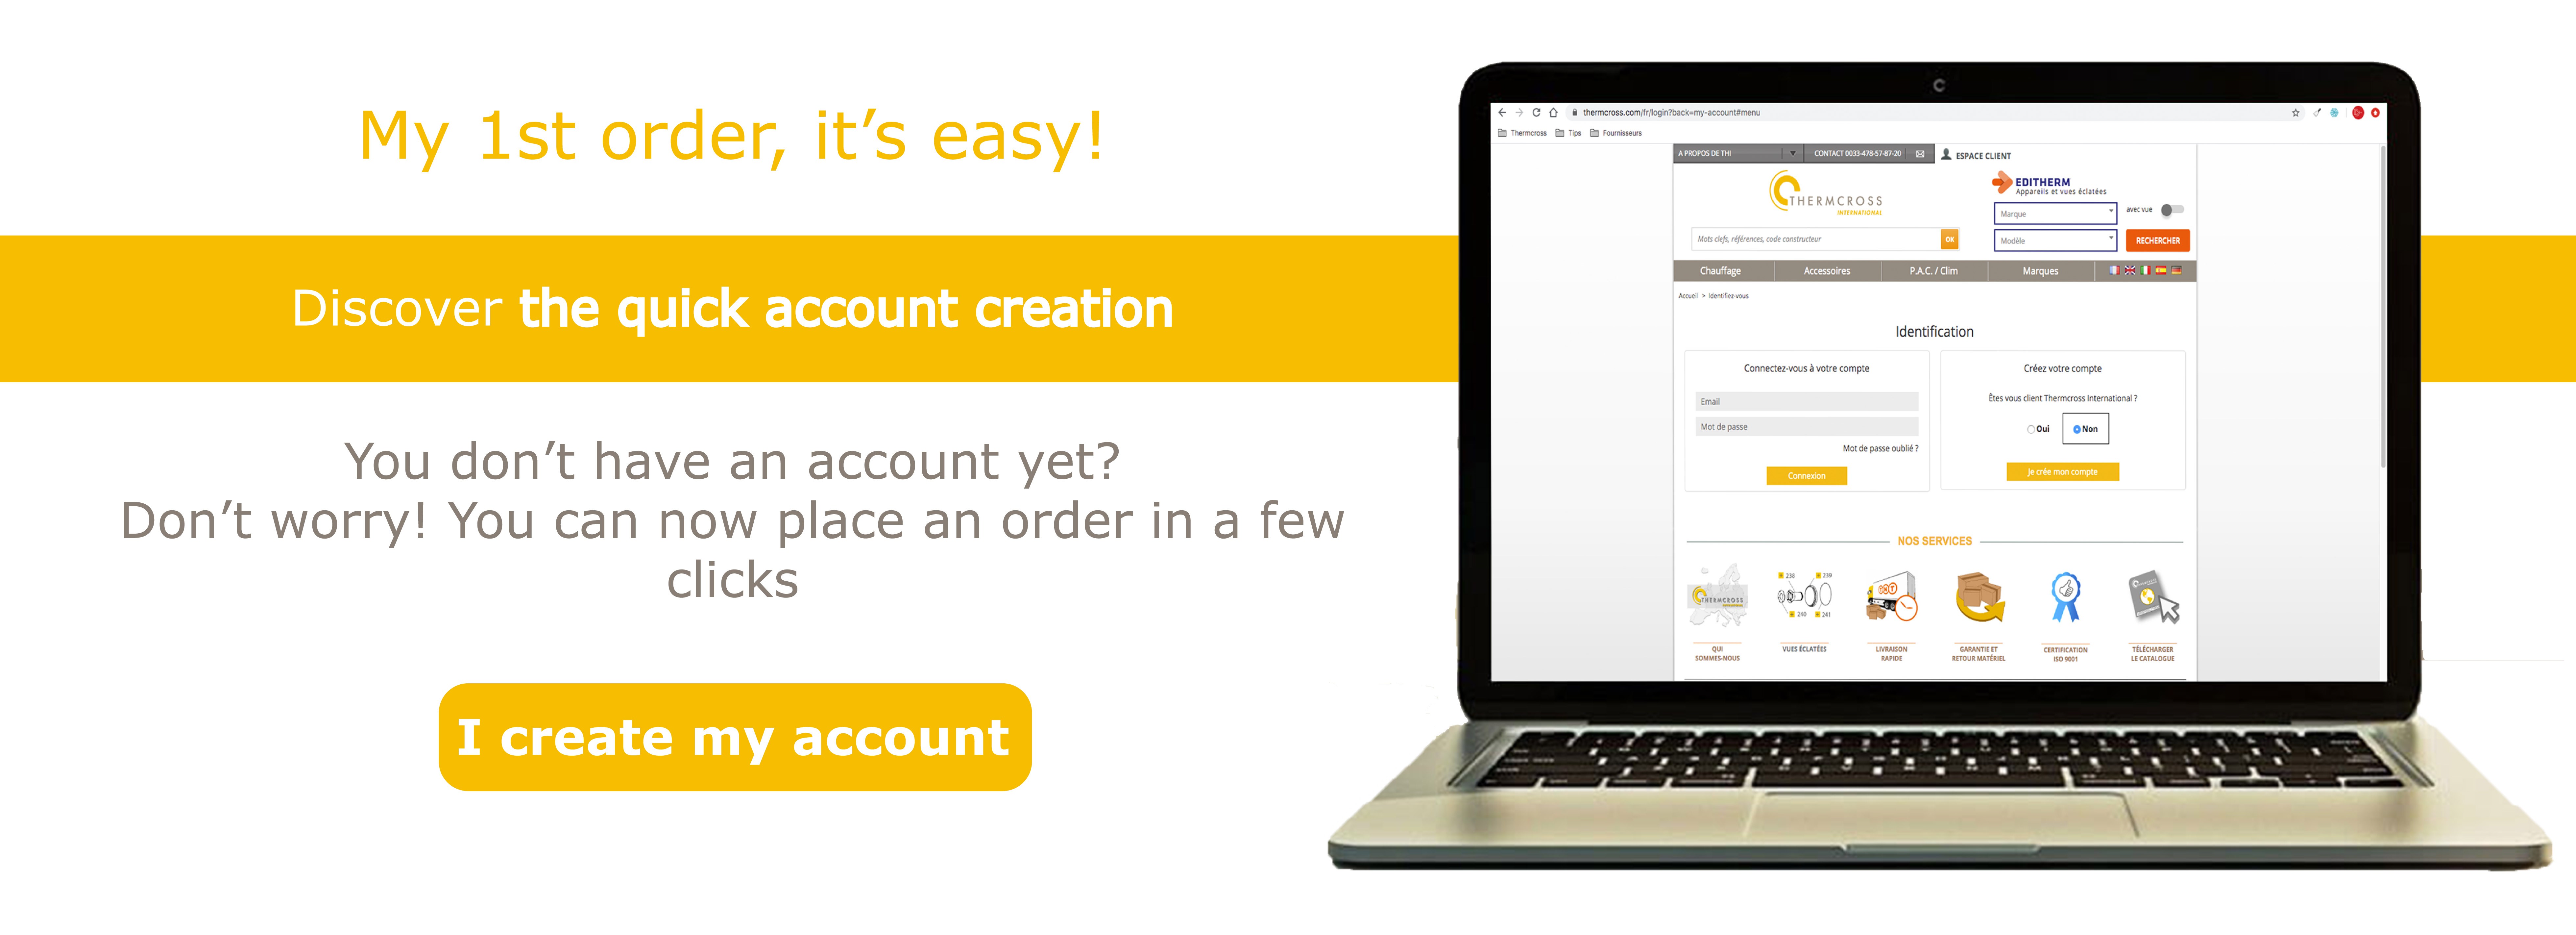 Discover the quick account creation